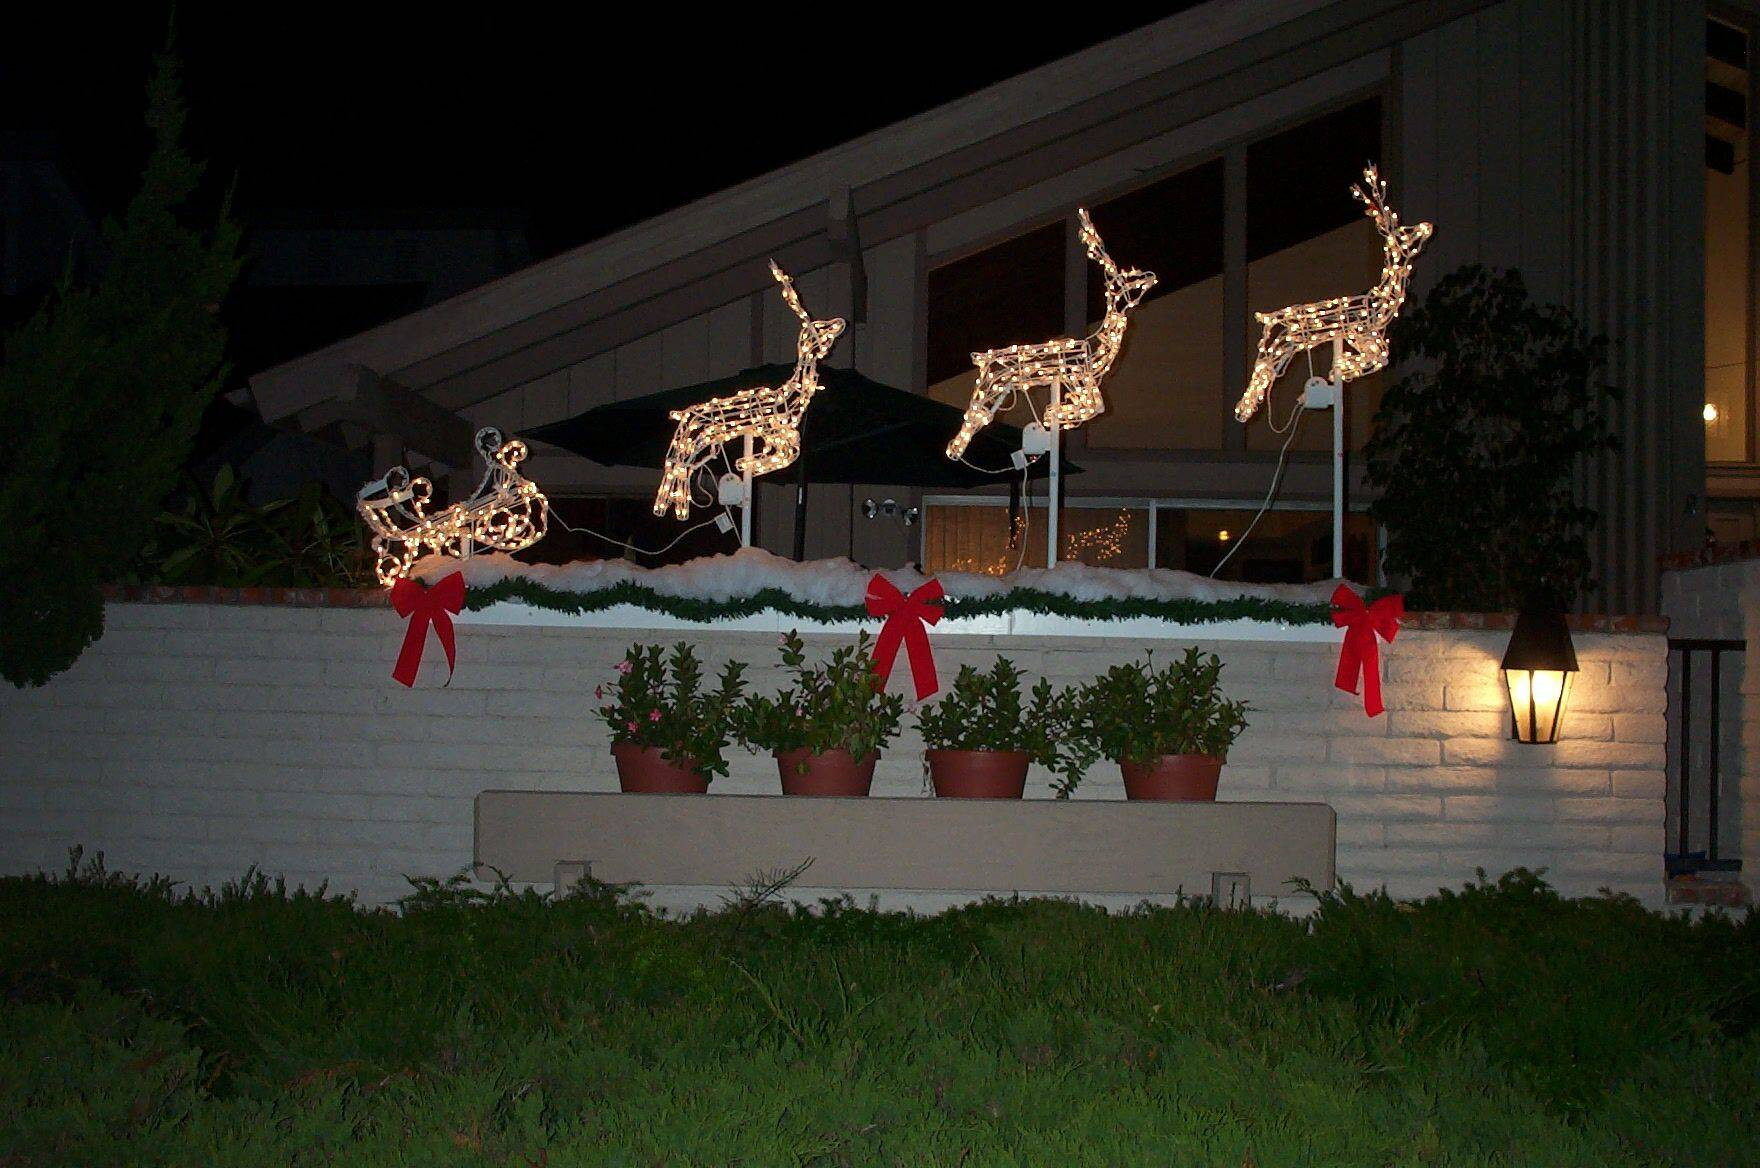 Outdoor Christmas Decorations For Sale
 20 Outdoor Christmas Decorations Ideas for this Year MagMent